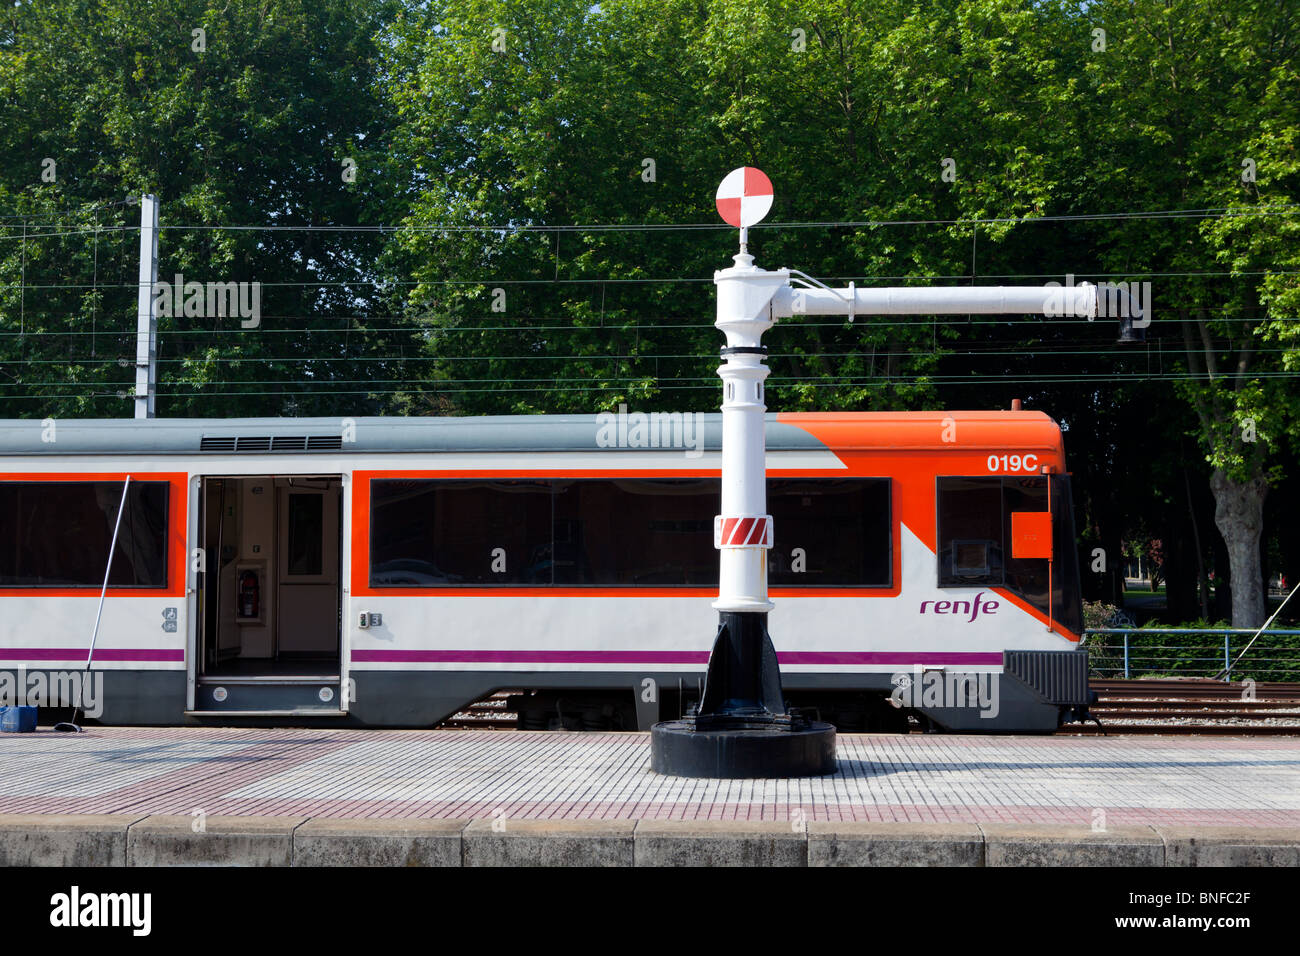 A RENFE commuter train at Vitoria-Gasteiz railway station,  capital of the Basque region in Northern Spain Stock Photo